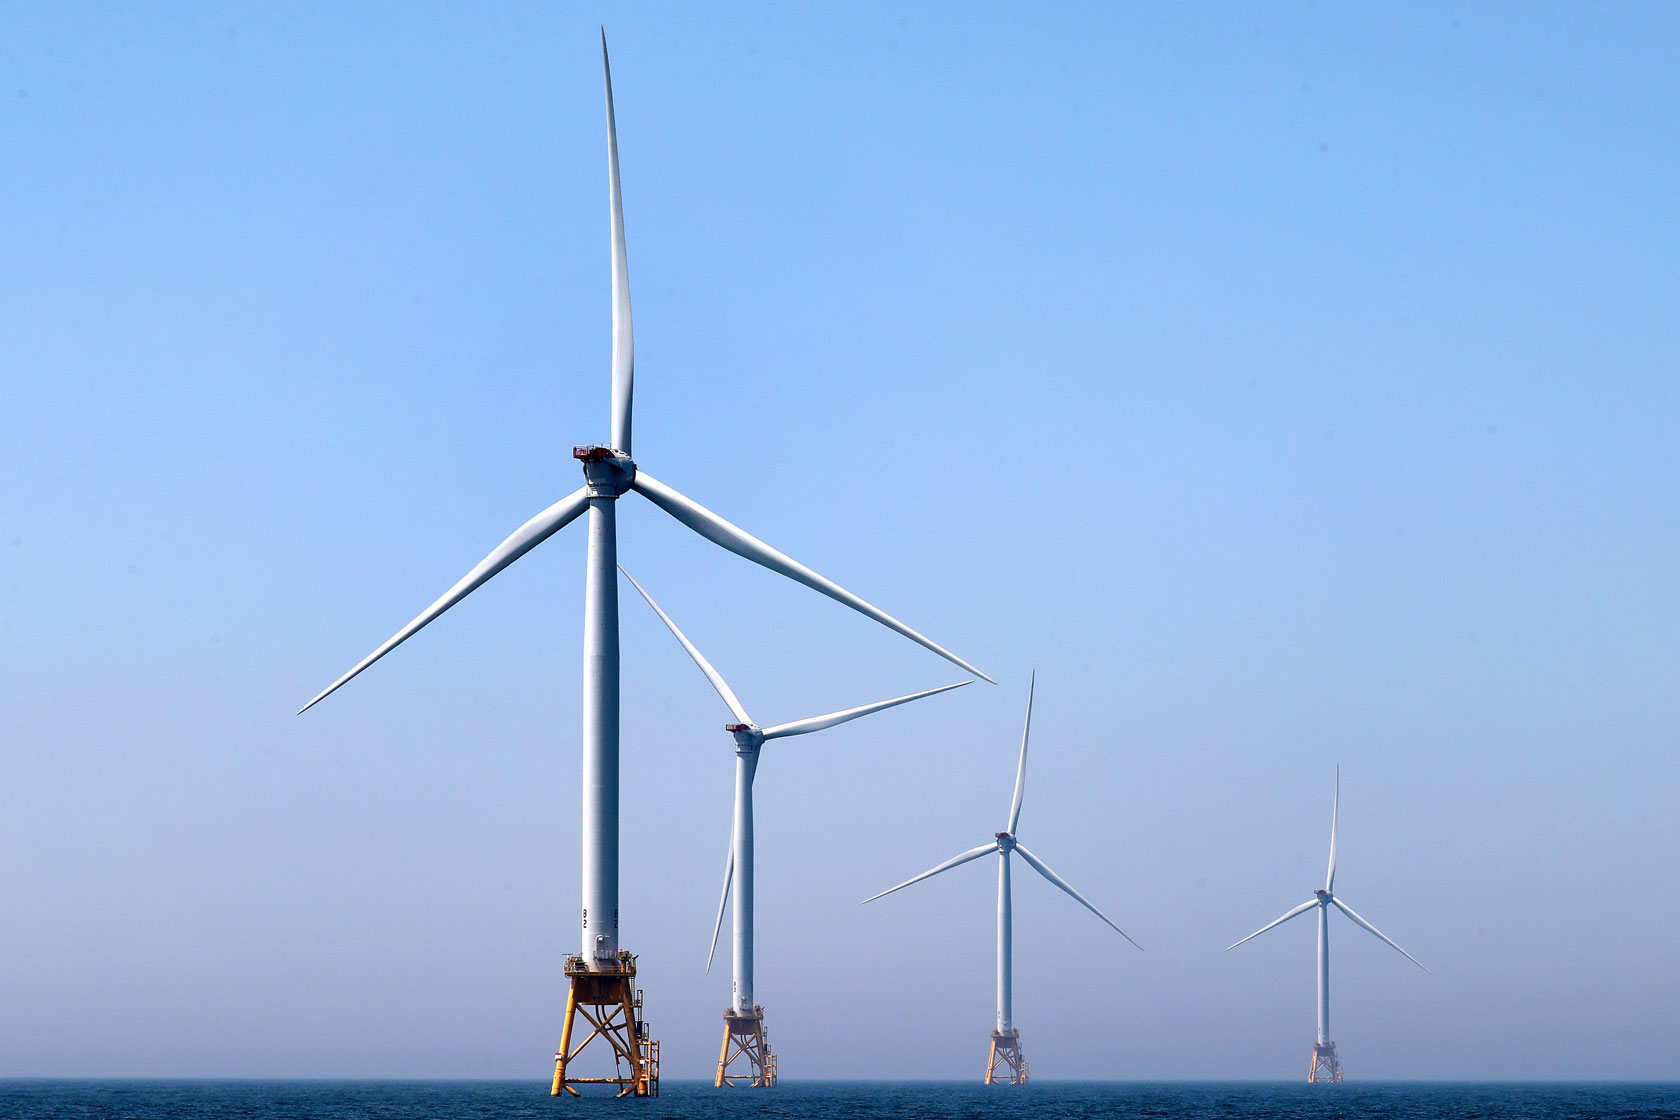 Wind energy facts, advantages, and disadvantages - Caltech Science Exchange